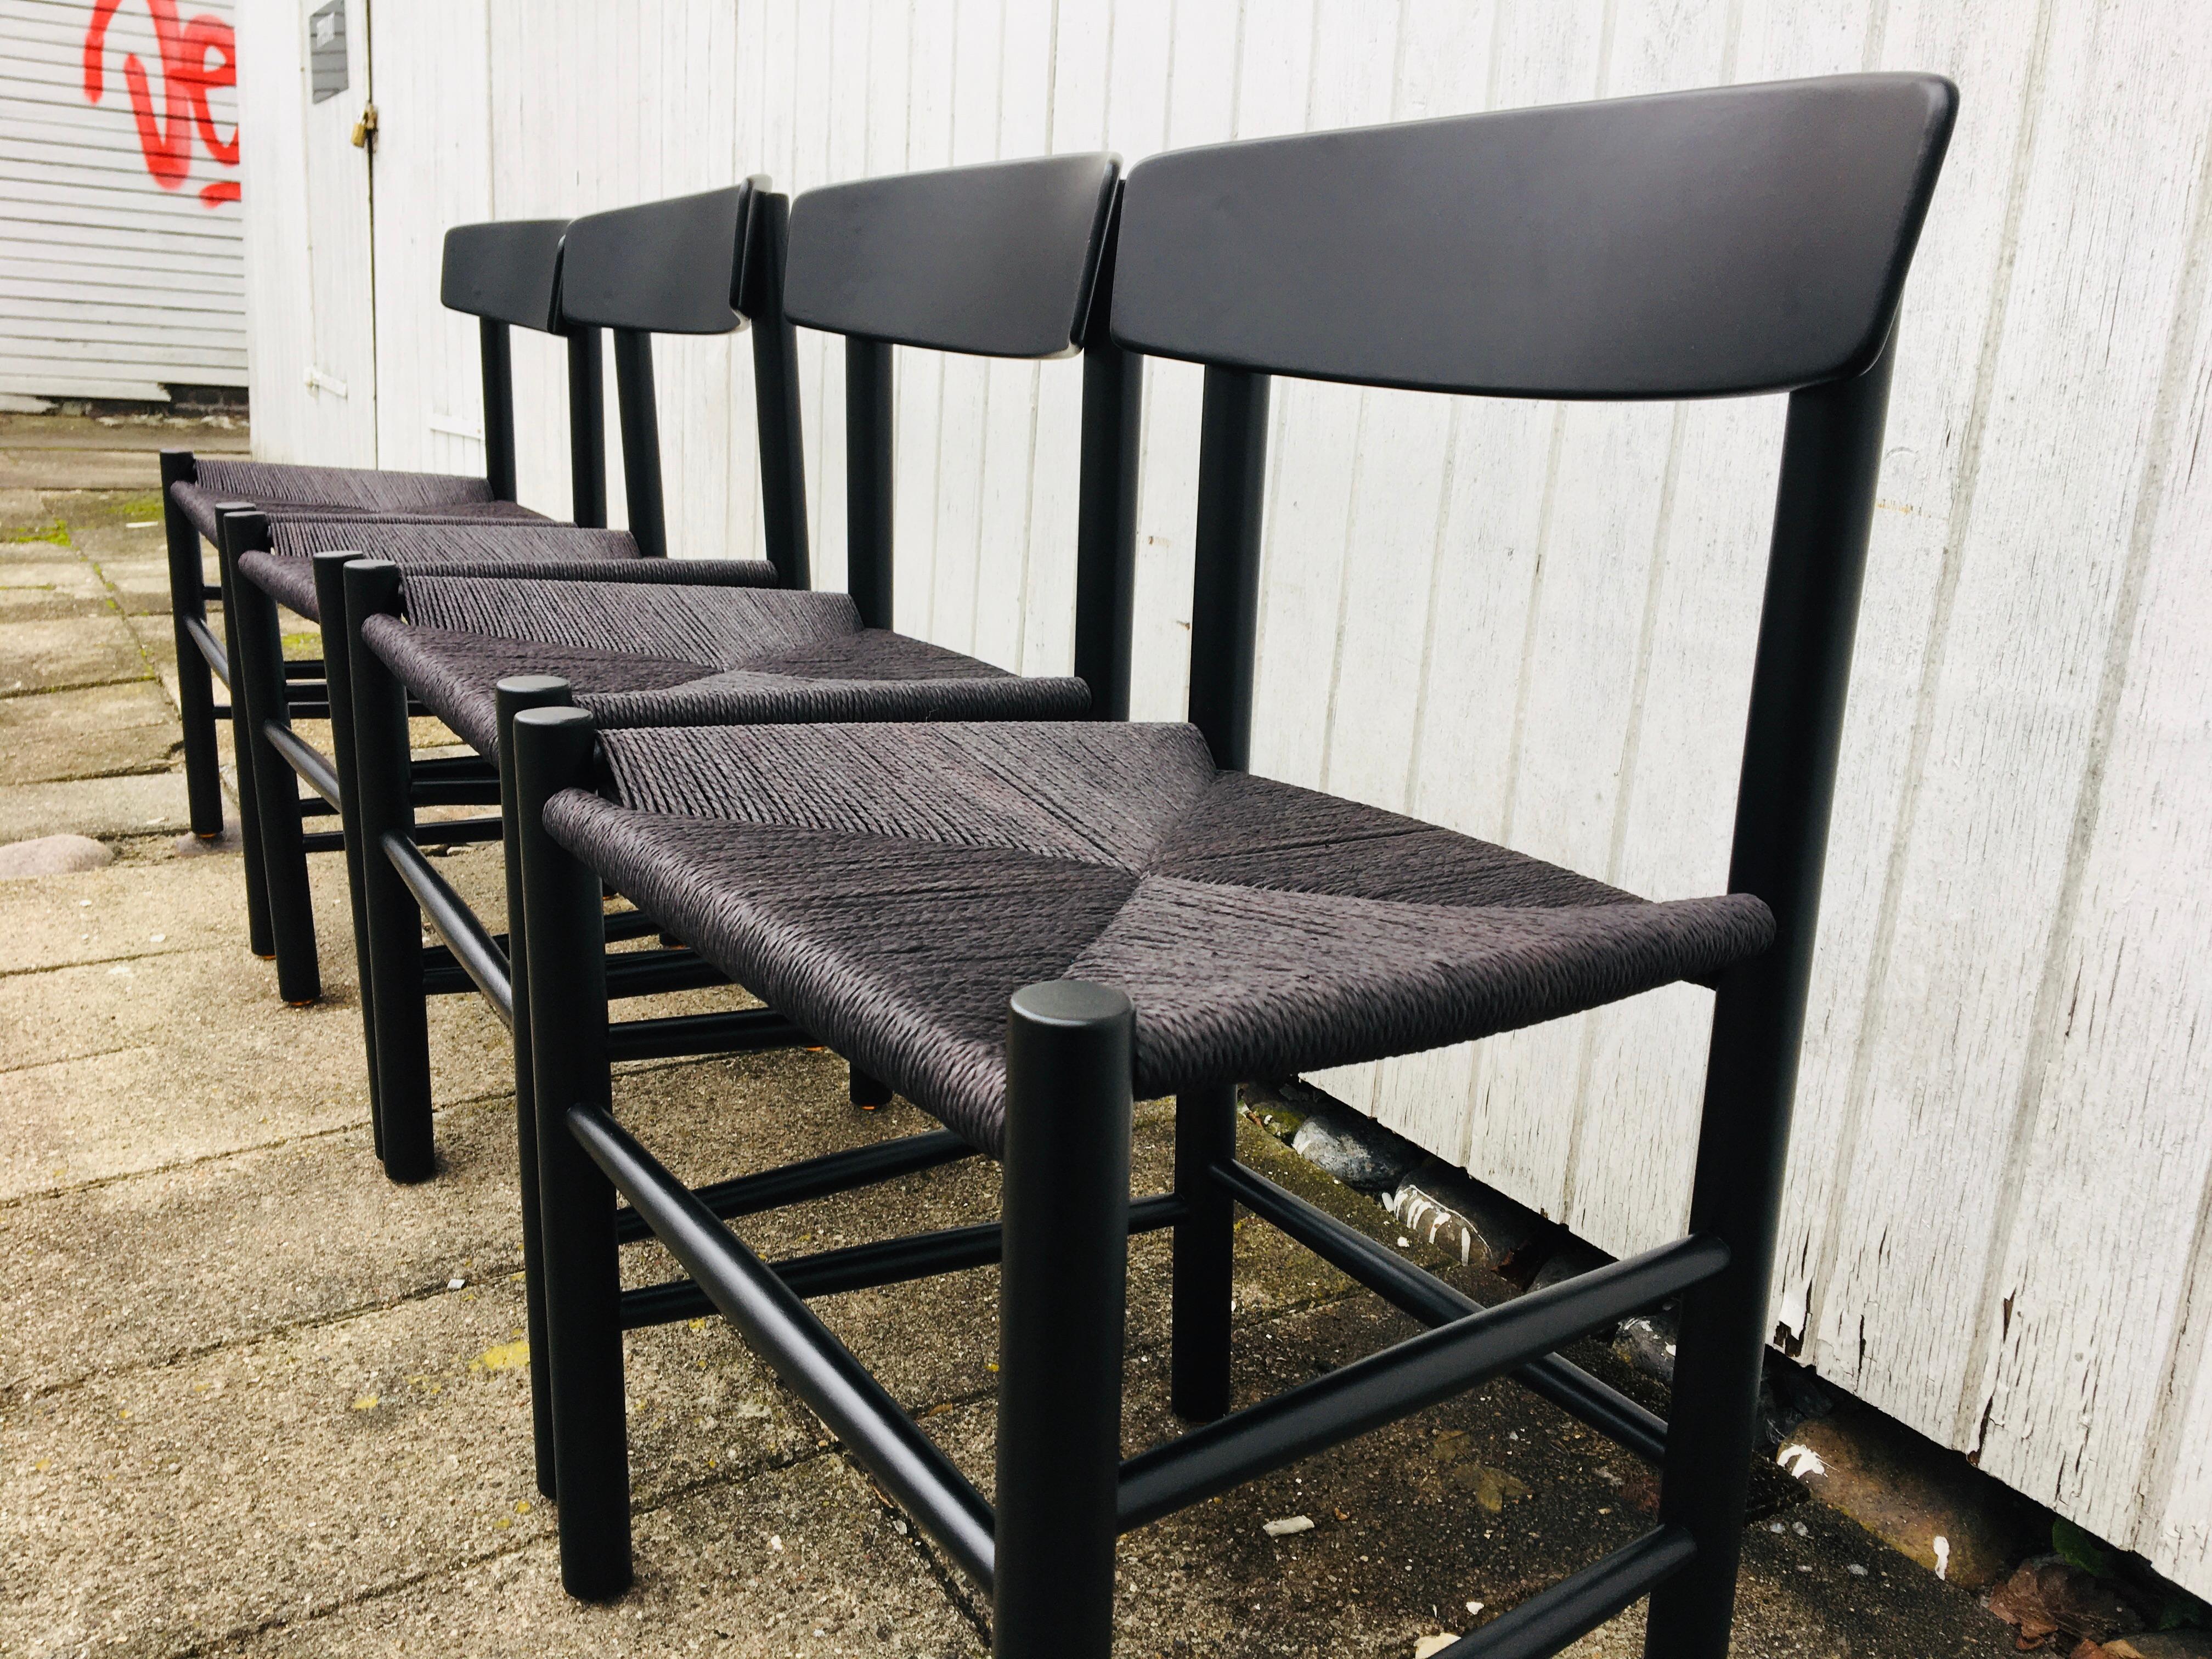 4 Pieces Borge Mogensen J39 Dining Chair, Black Lacquer In Good Condition In Odense, Denmark